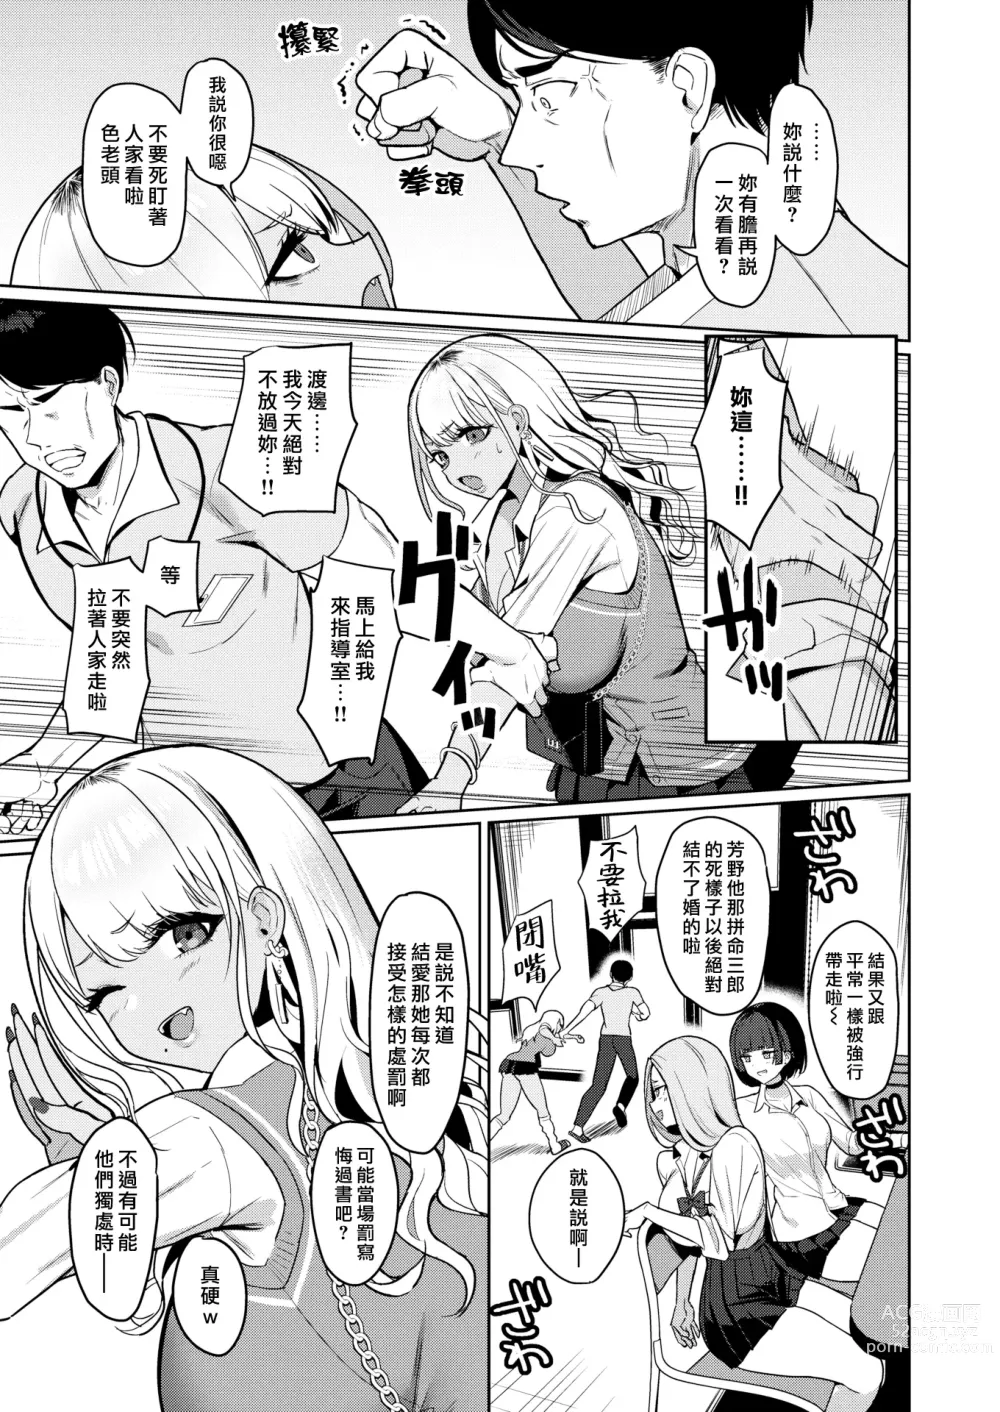 Page 3 of doujinshi センセイなんて大っ嫌い!!